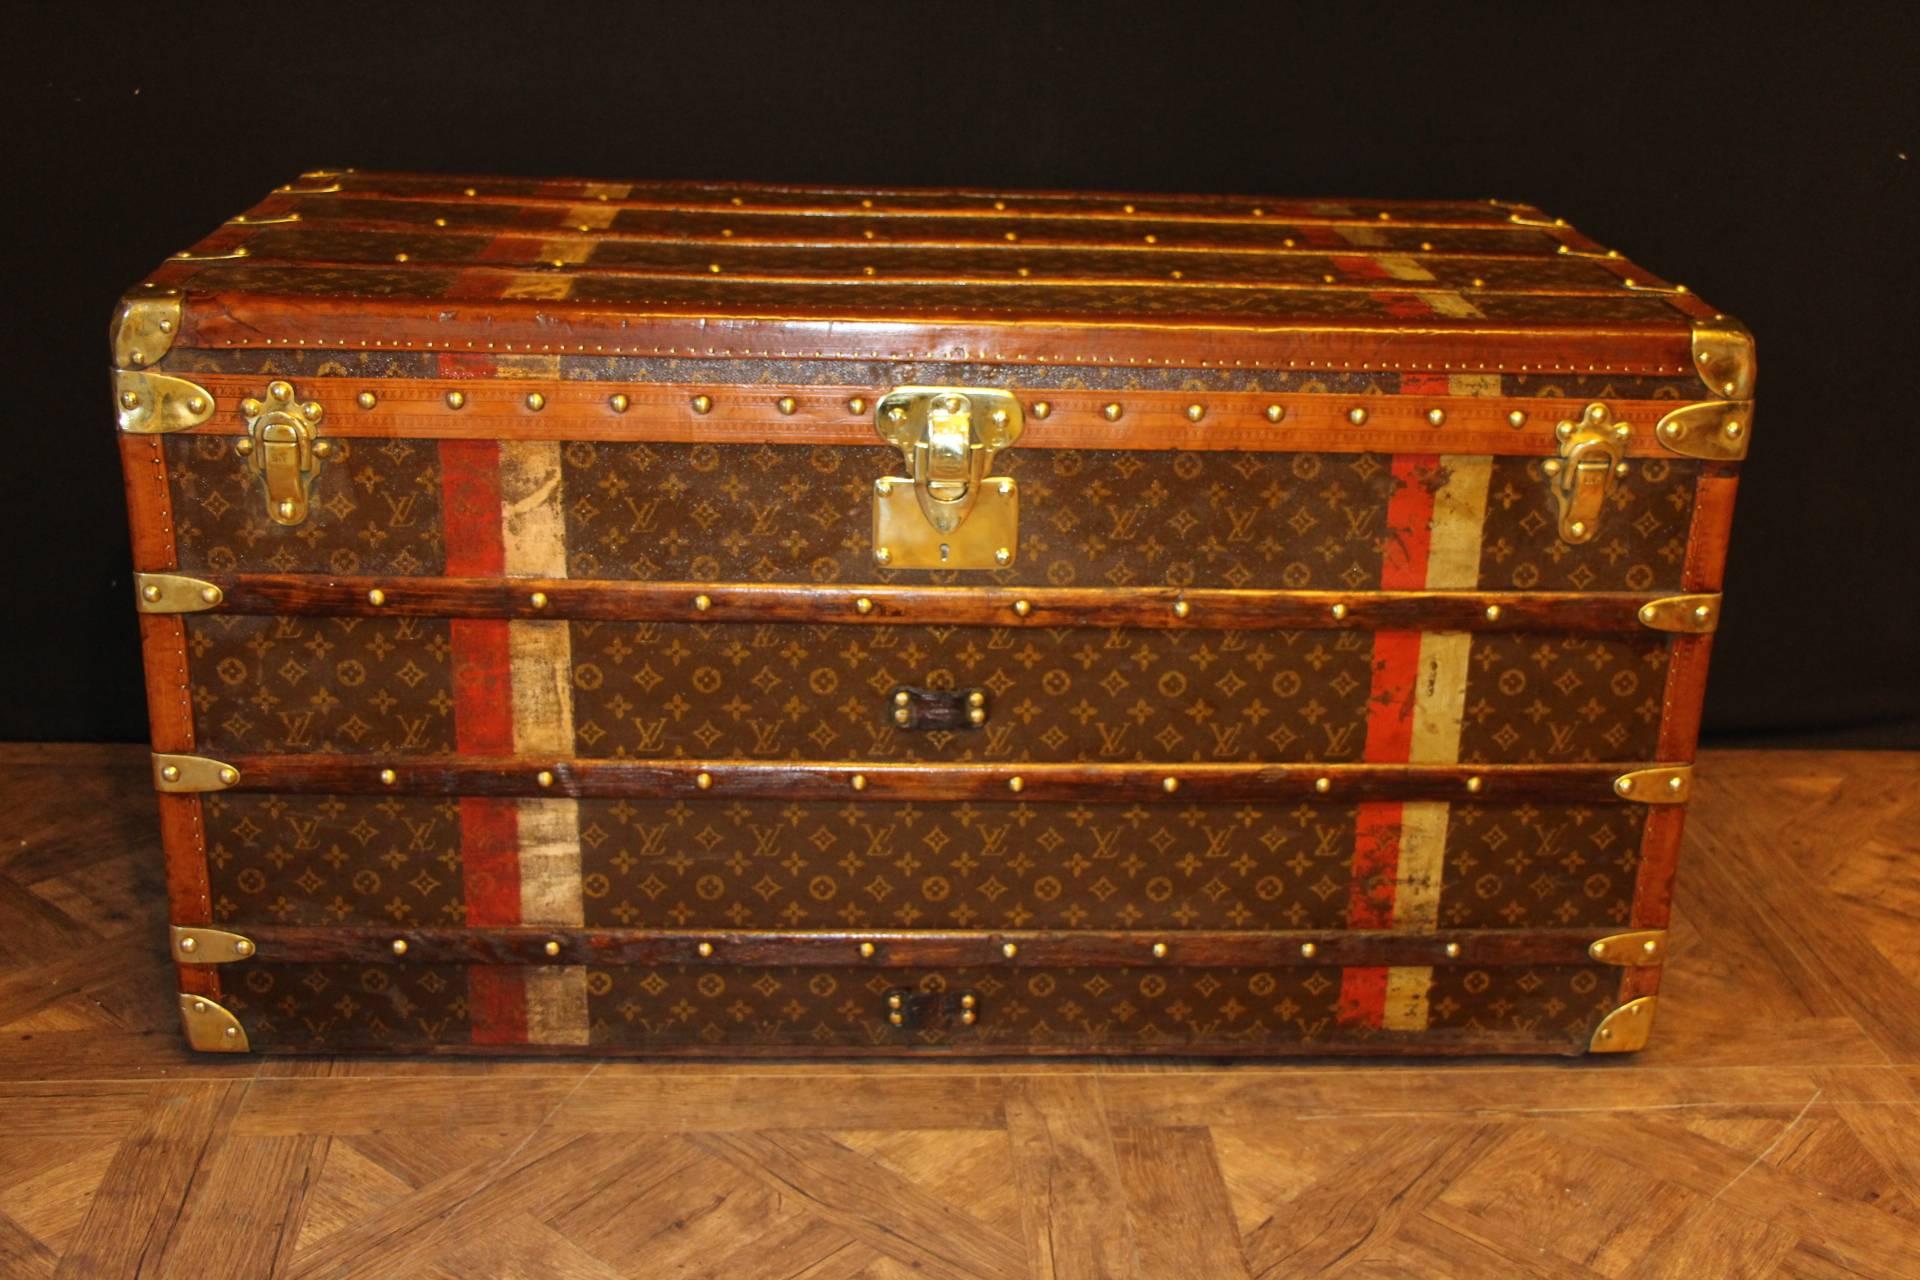 This beautiful Louis Vuitton trunk is all stenciled LV monogram canvas, with all brass hardware and lozine trim. It has got a remarkable patina. Red and white identity stripes.
All original beige linen interior with one large removable tray.
Its